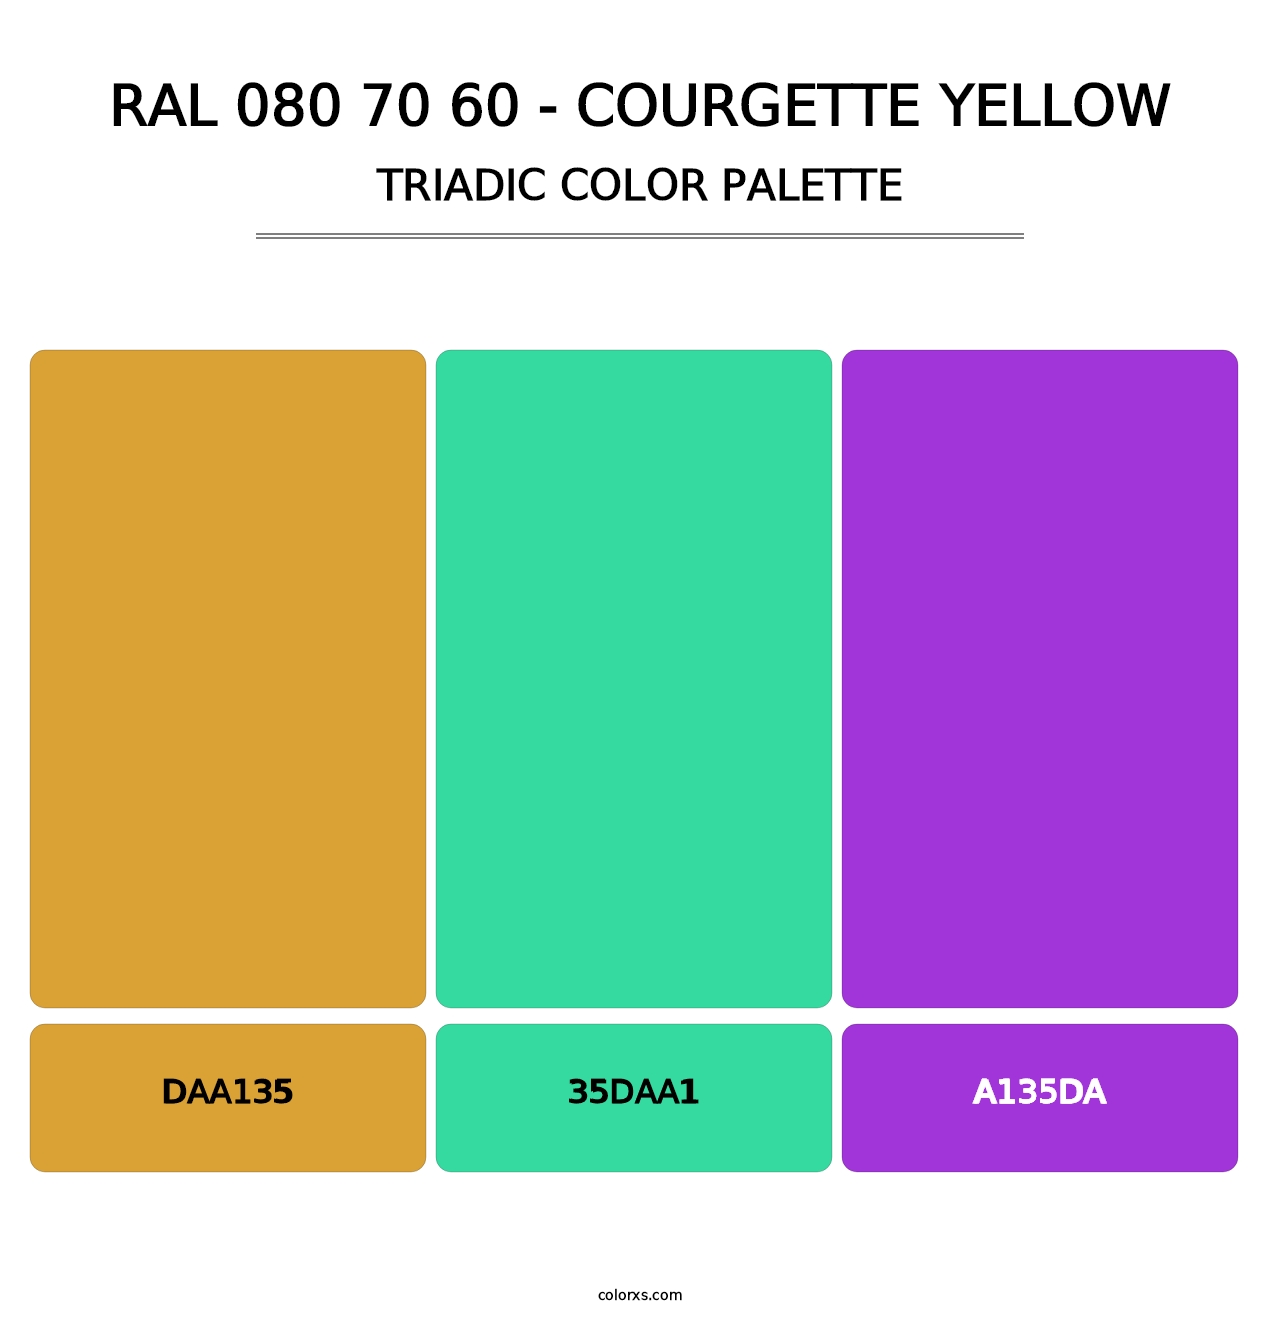 RAL 080 70 60 - Courgette Yellow - Triadic Color Palette